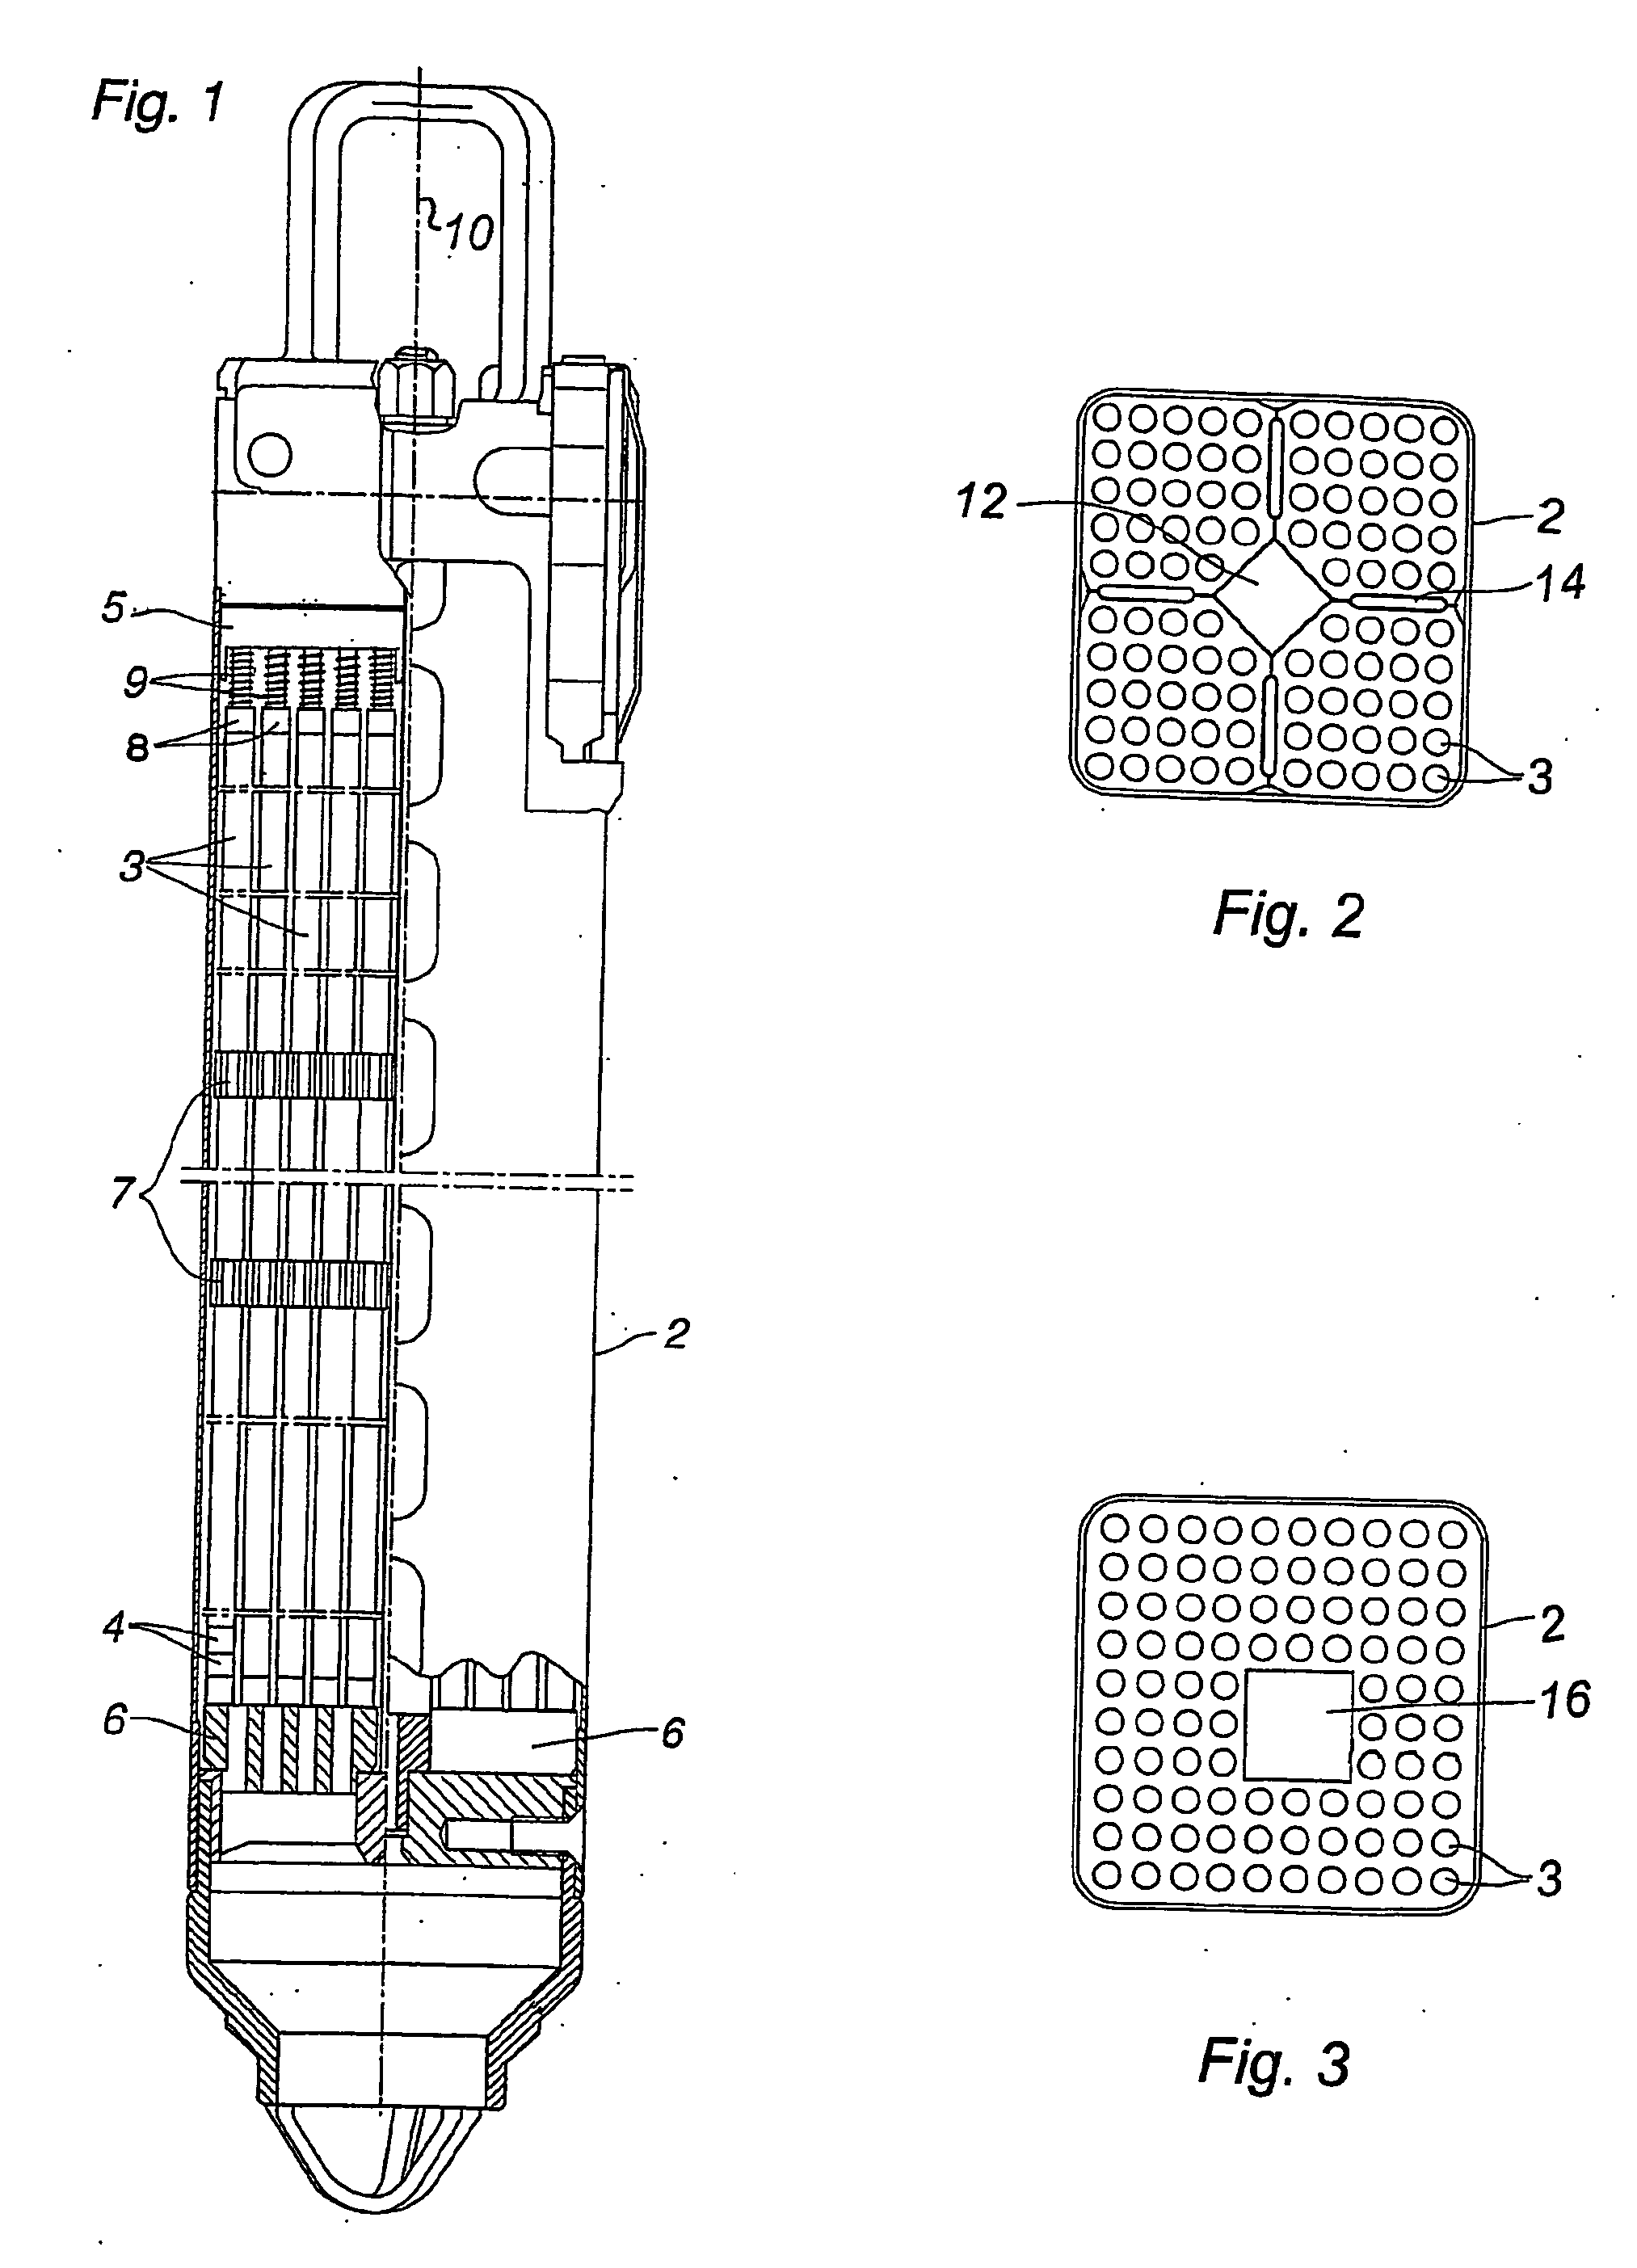 Method, use and device relating to nuclear light water reactors